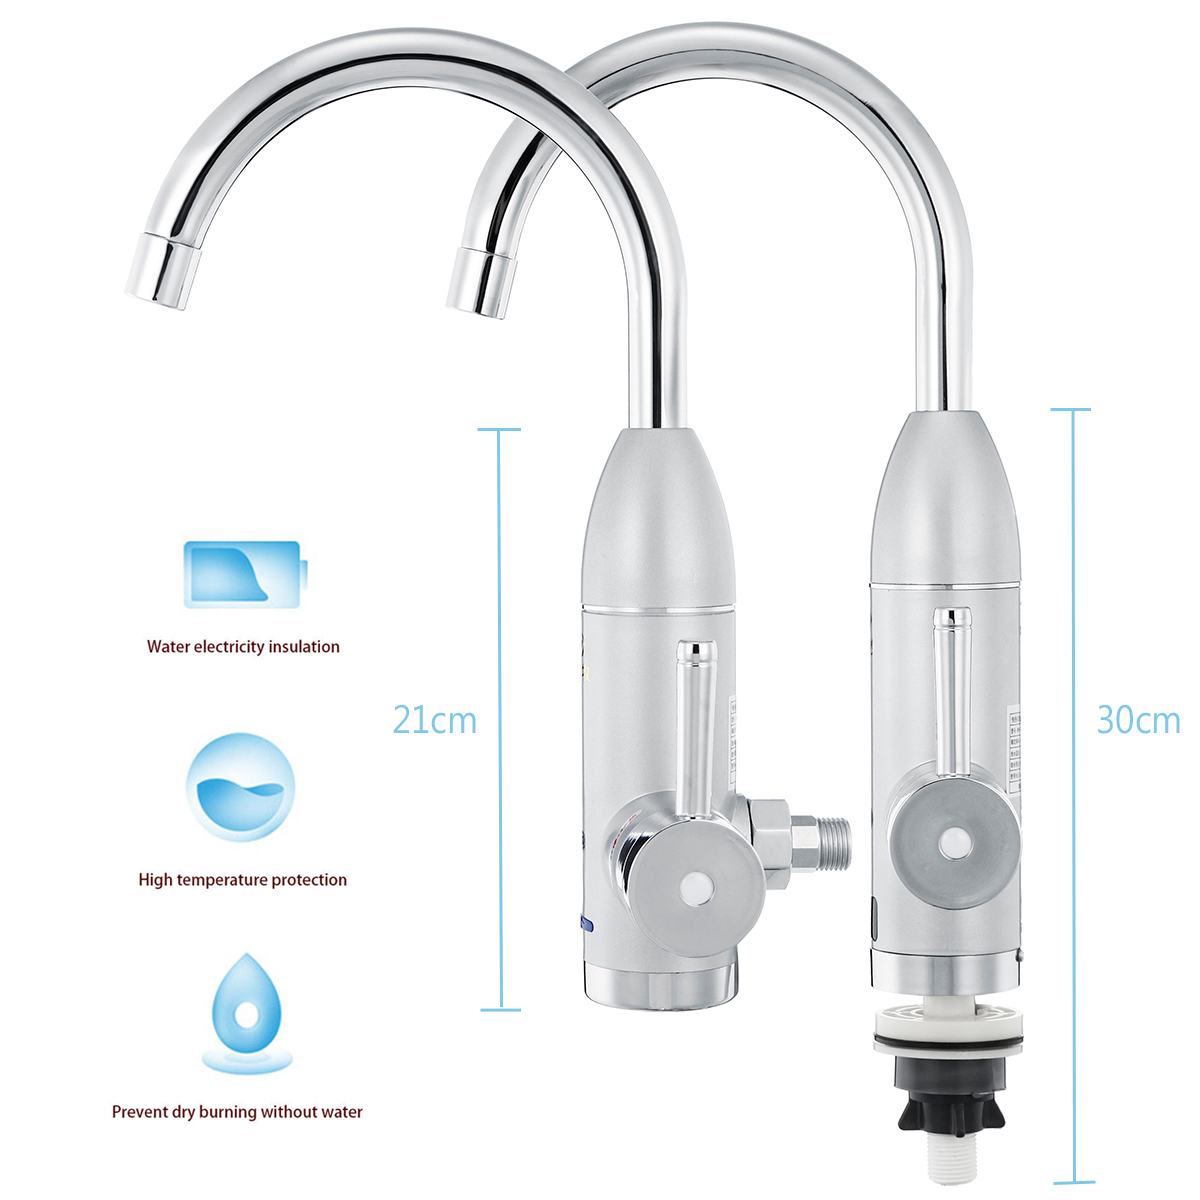 220V-3000W-360deg-LED-Electric-Instant-Heater-Faucet-Home-Kitchen-Bathroom-Hot-amp-Cold-Mixer-Tap-1420294